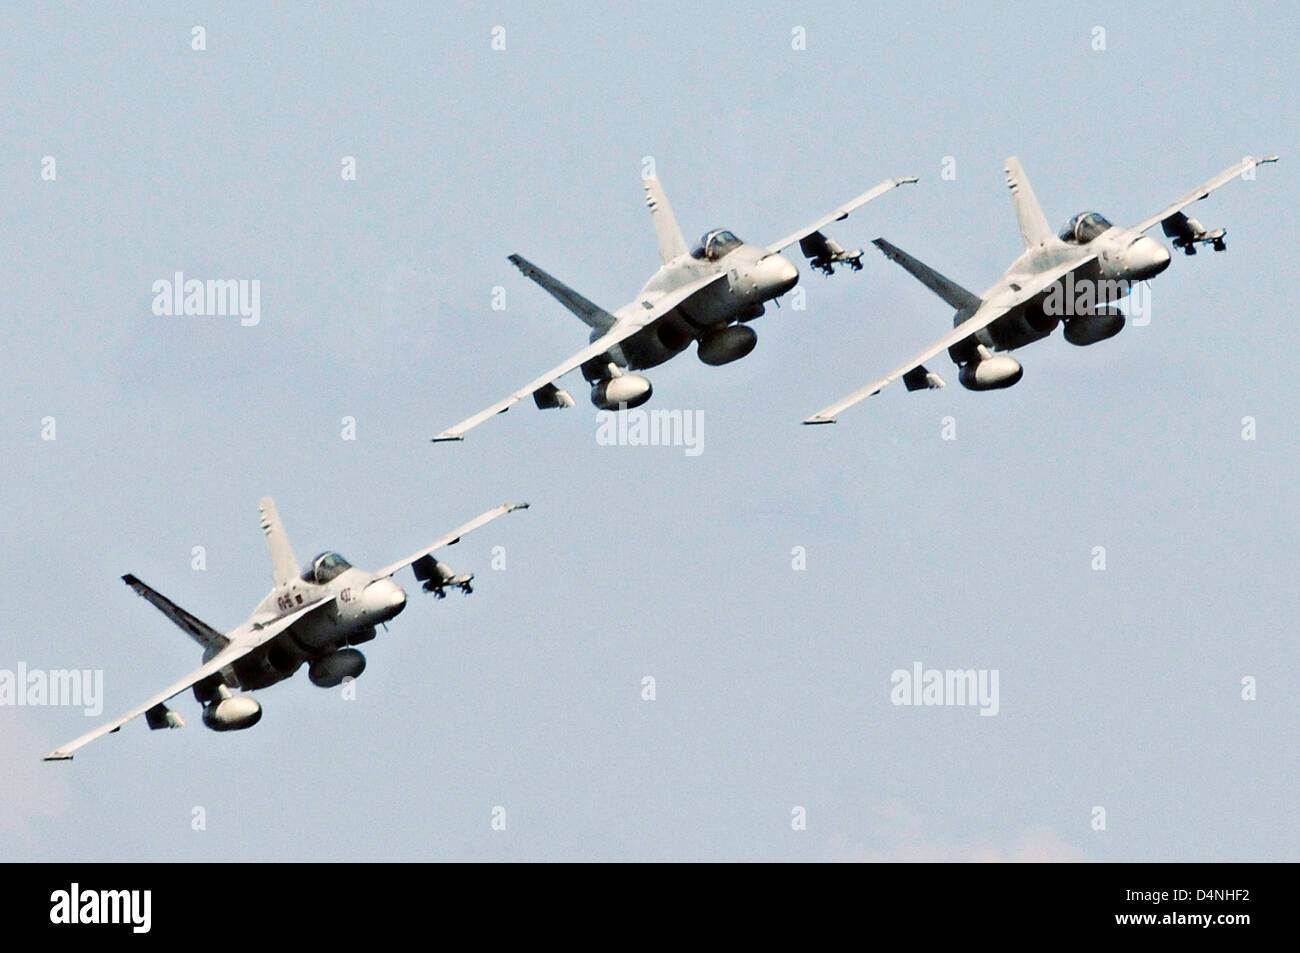 US Navy F/A-18C Hornet fighter aircraft fly in formation near the aircraft carrier USS Nimitz January 7, 2010 in the North Arabian Sea. Stock Photo